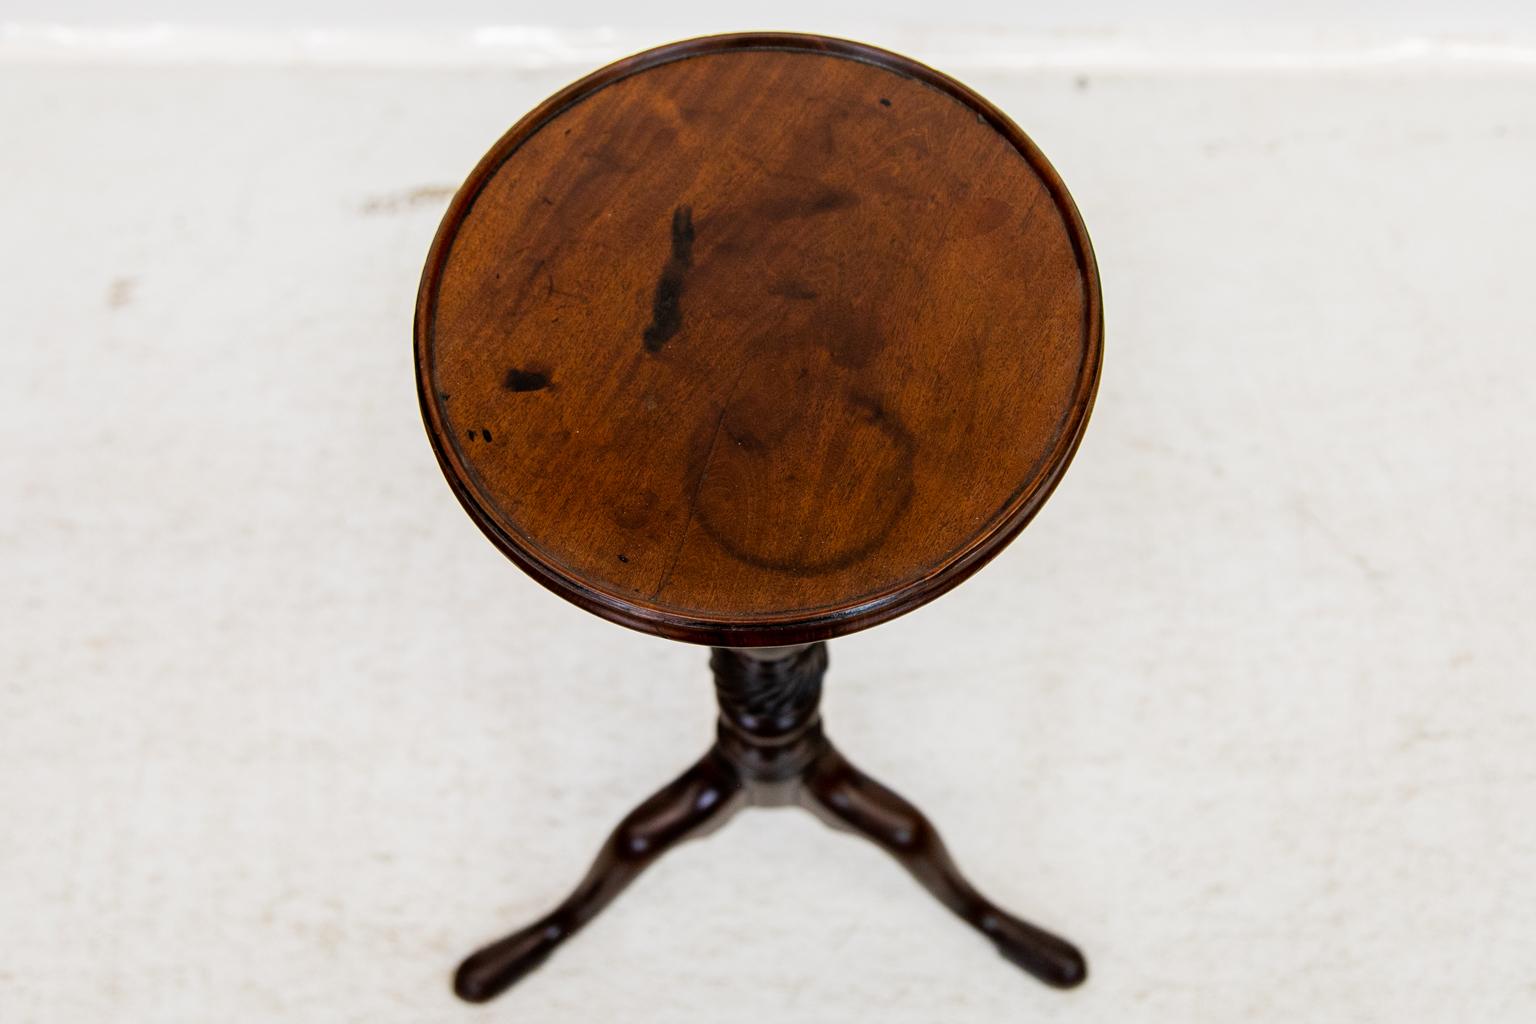 This table has a vase turned stem above a spiraled knop. Two of the legs have been reinforced at some time with a screw that has been filled over with a circular plug. The top has some dark stains and a minor shrinkage crack. The top has a shallow